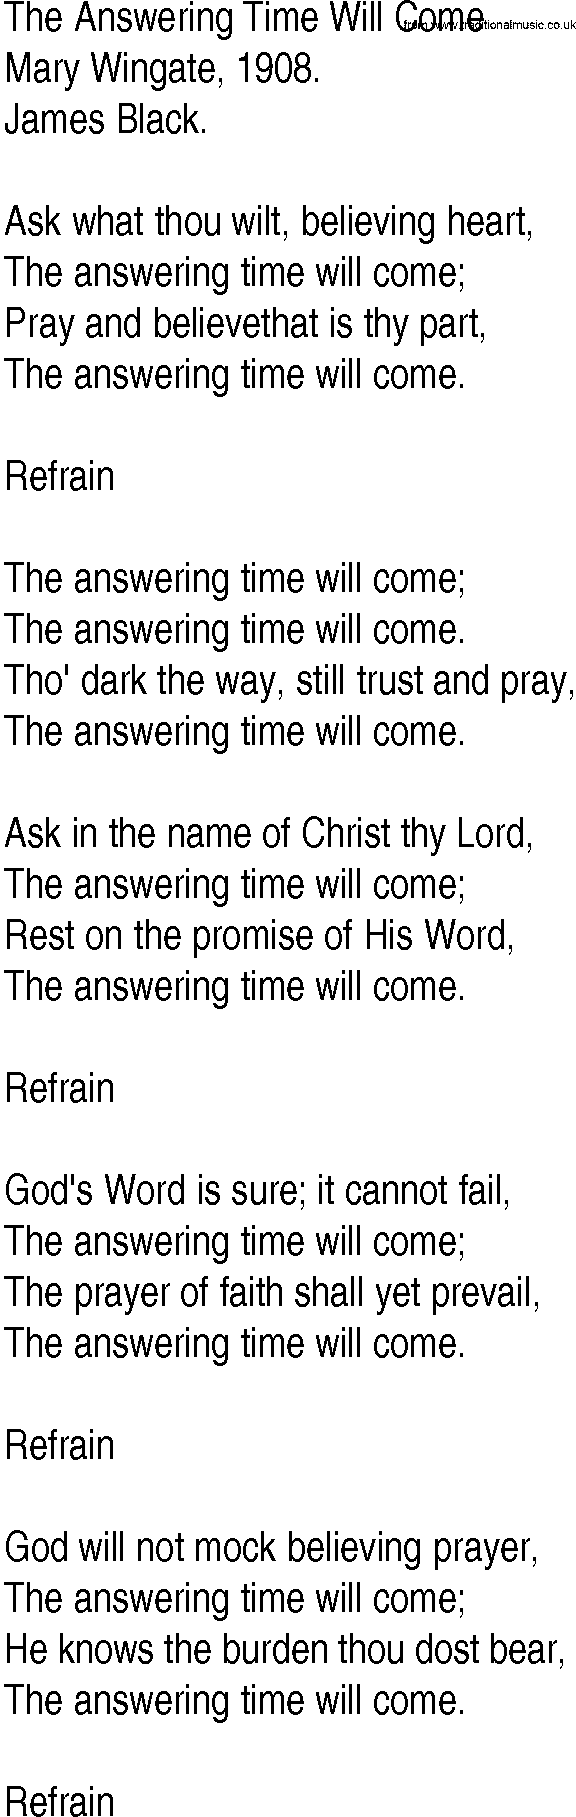 Hymn and Gospel Song: The Answering Time Will Come by Mary Wingate lyrics